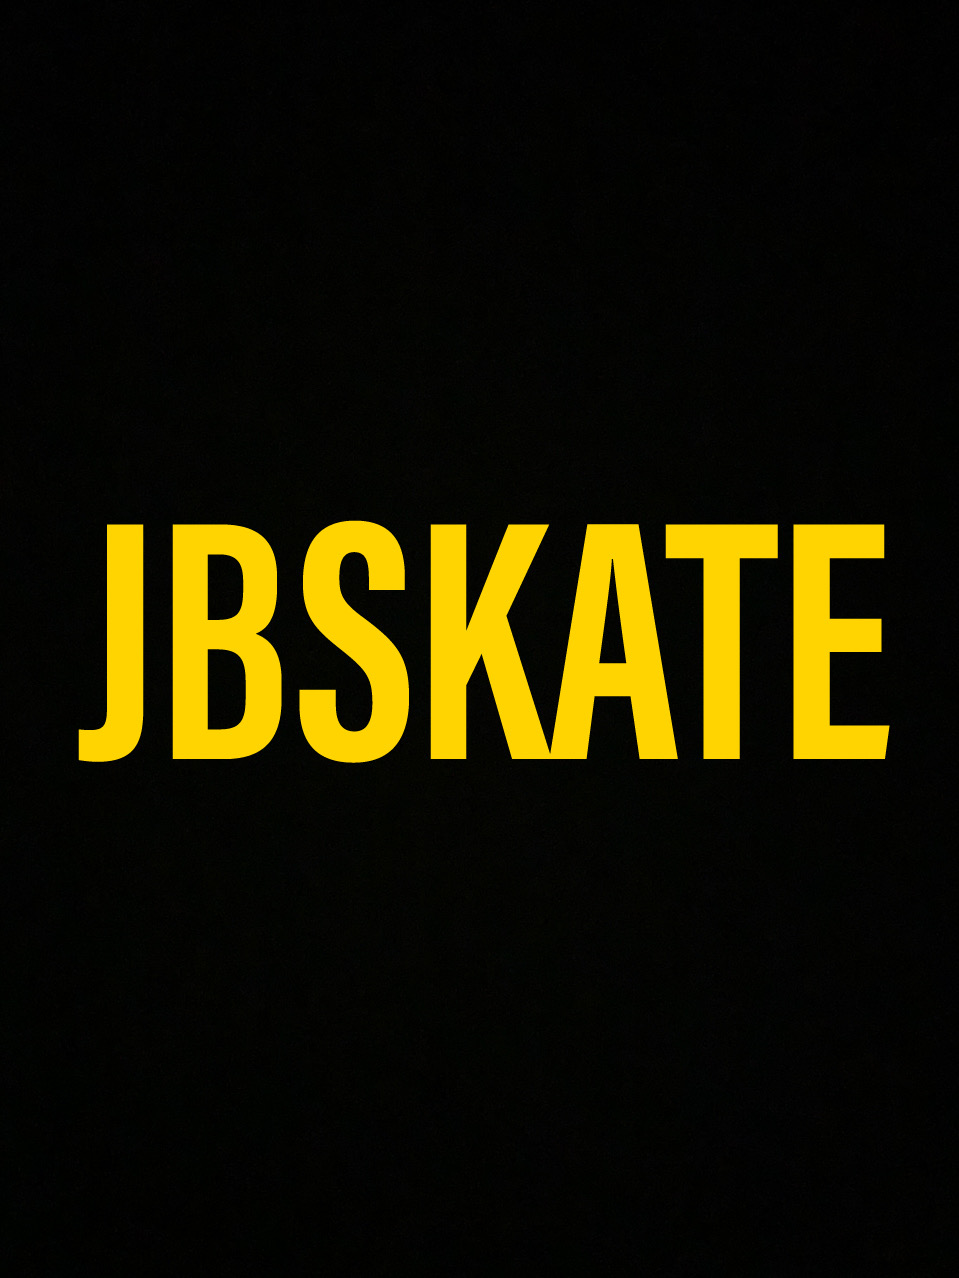 The home of JBSKATING from Chicago.